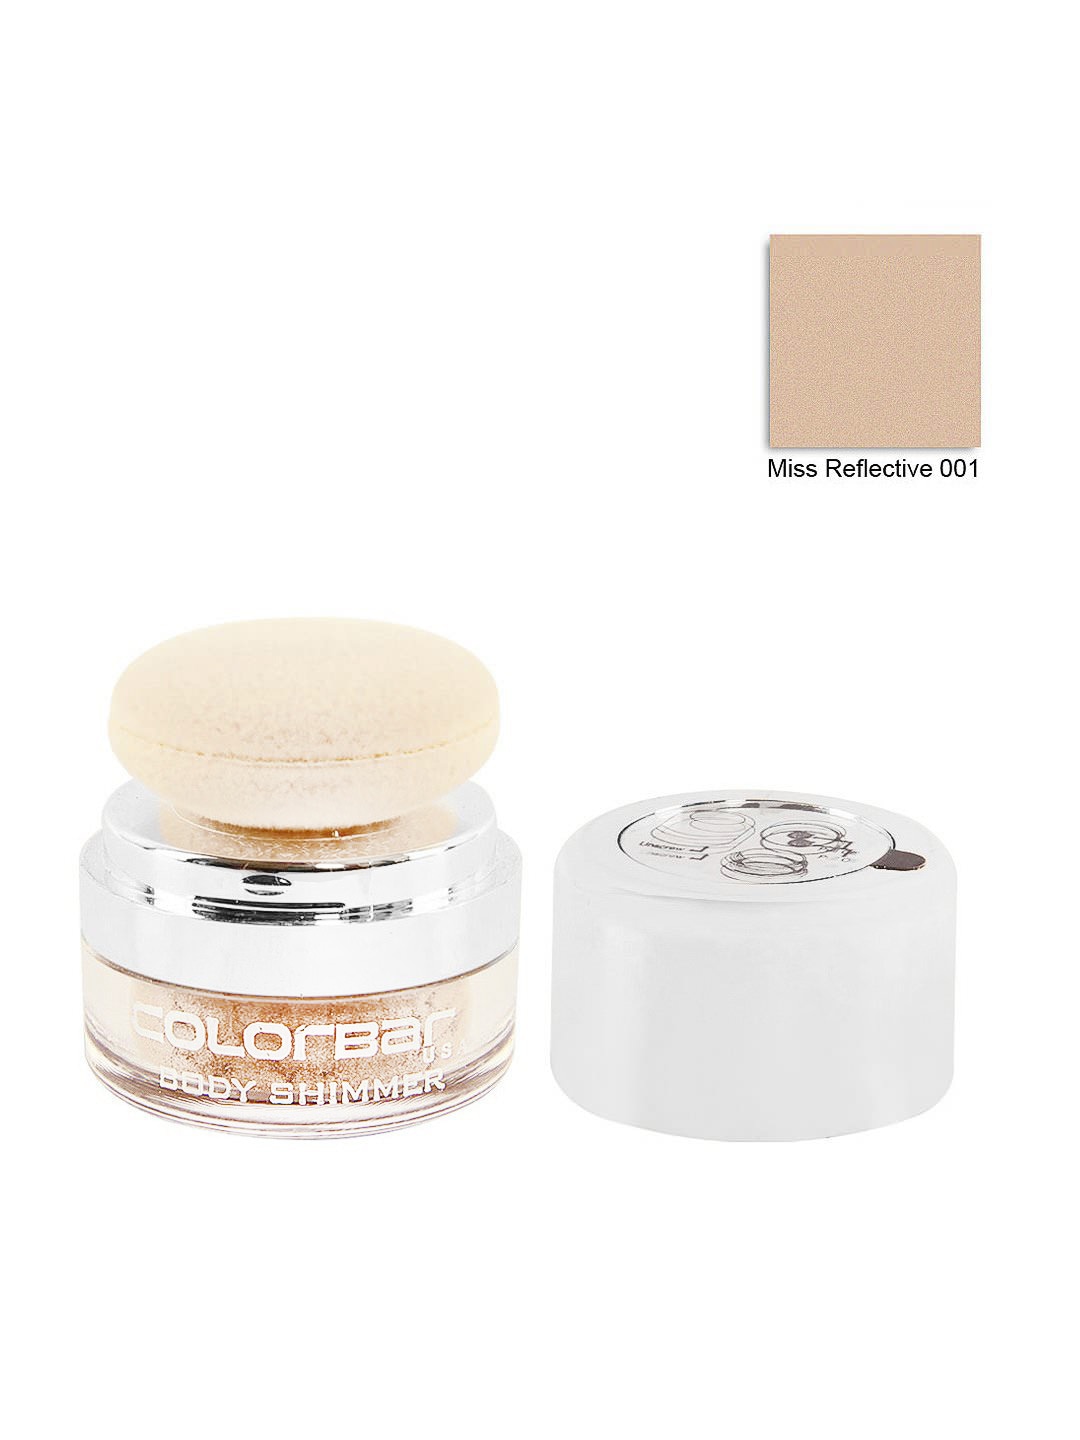 Colorbar Miss Reflective Body Shimmer 001